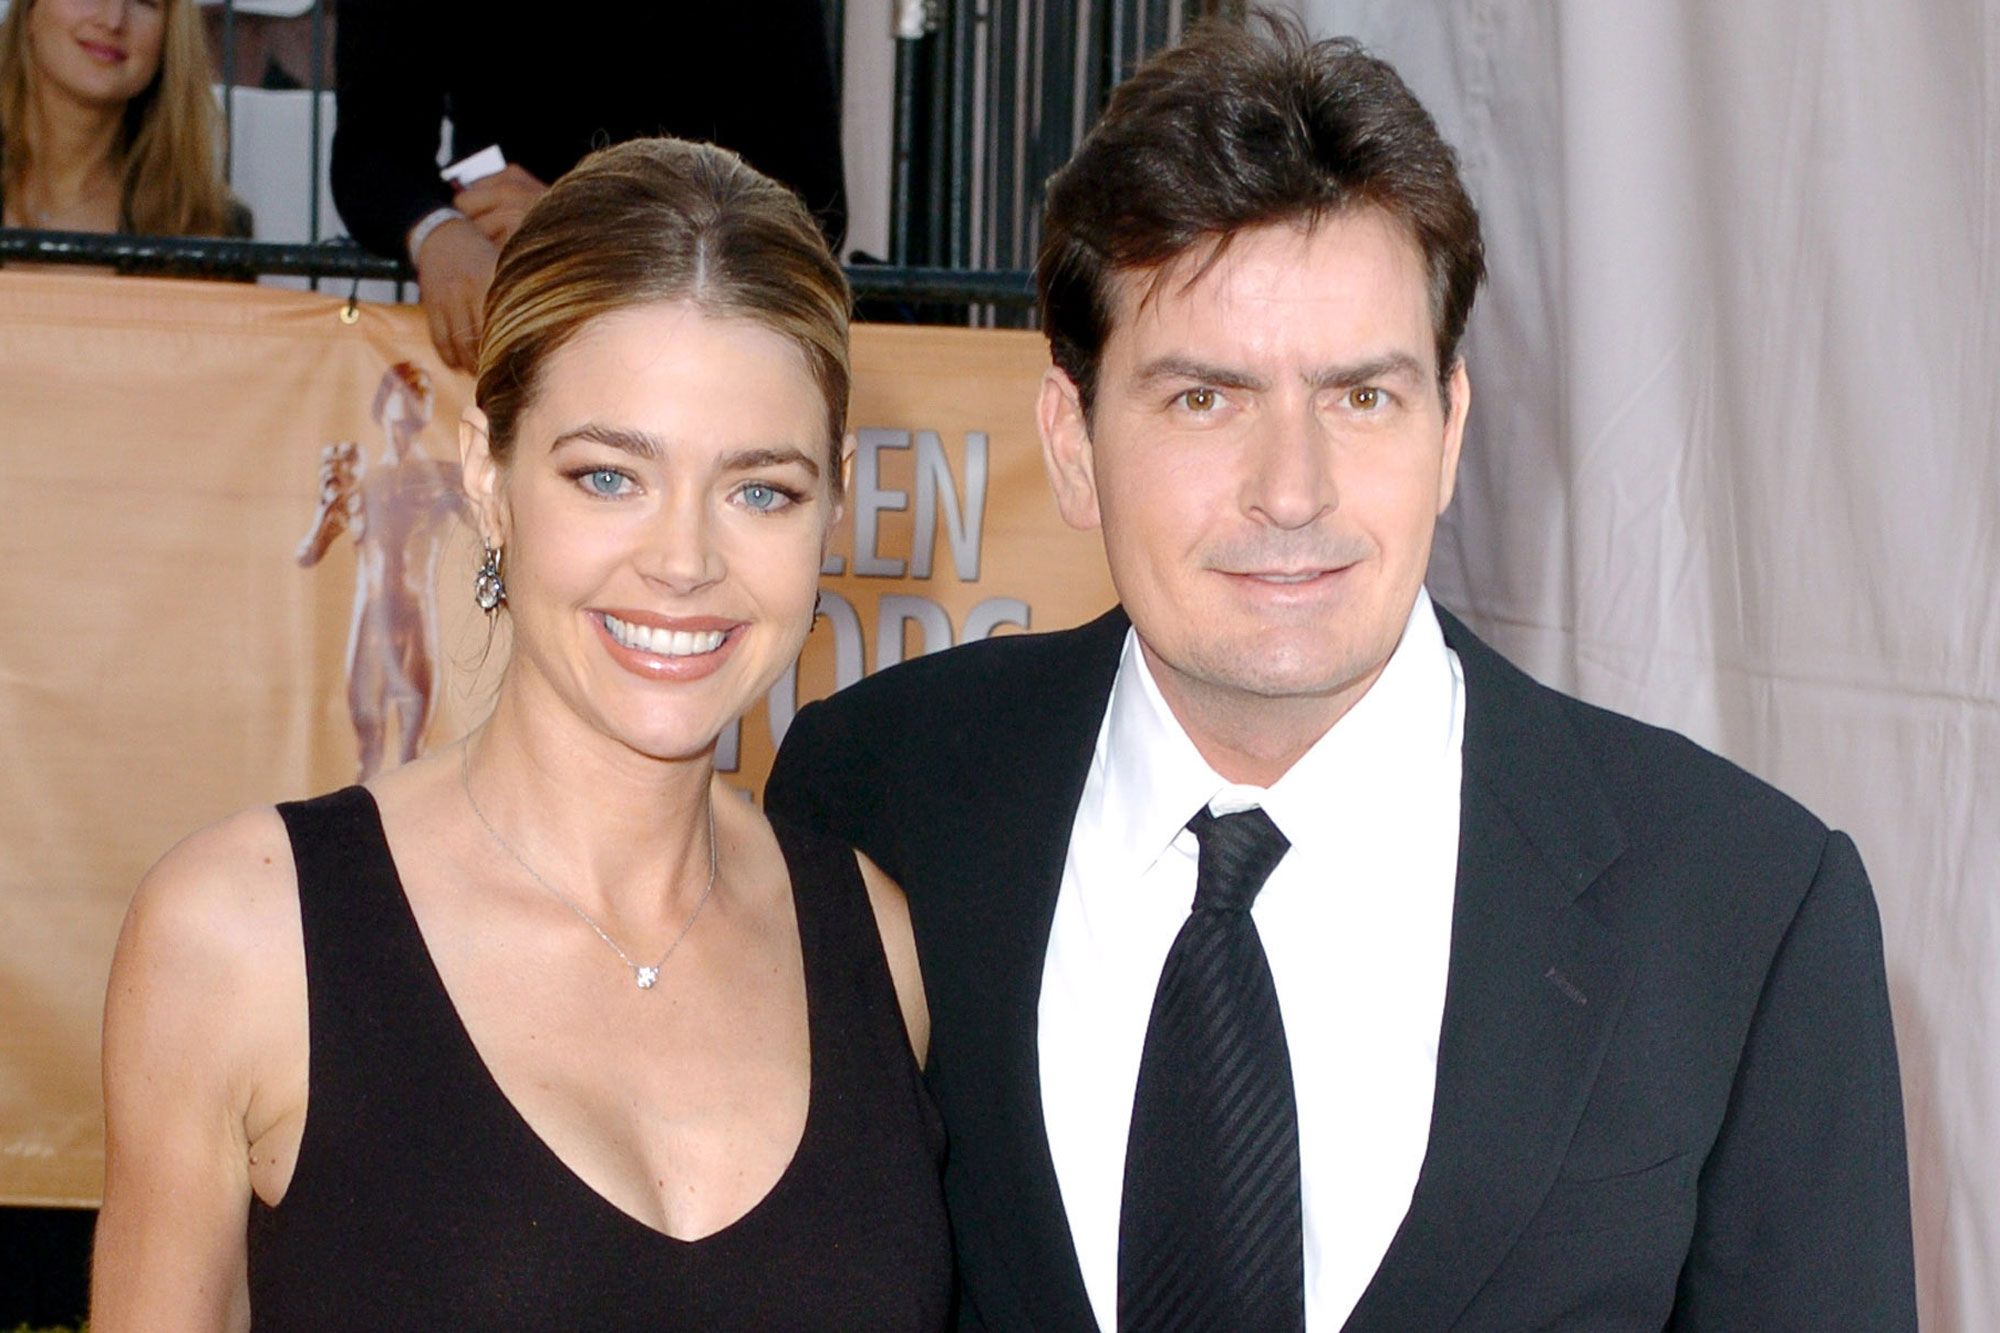 Charlie Sheen's Daughter Sami Sheen have claimed that She Spent Days without Eating While Living with her Mother Denise Richards